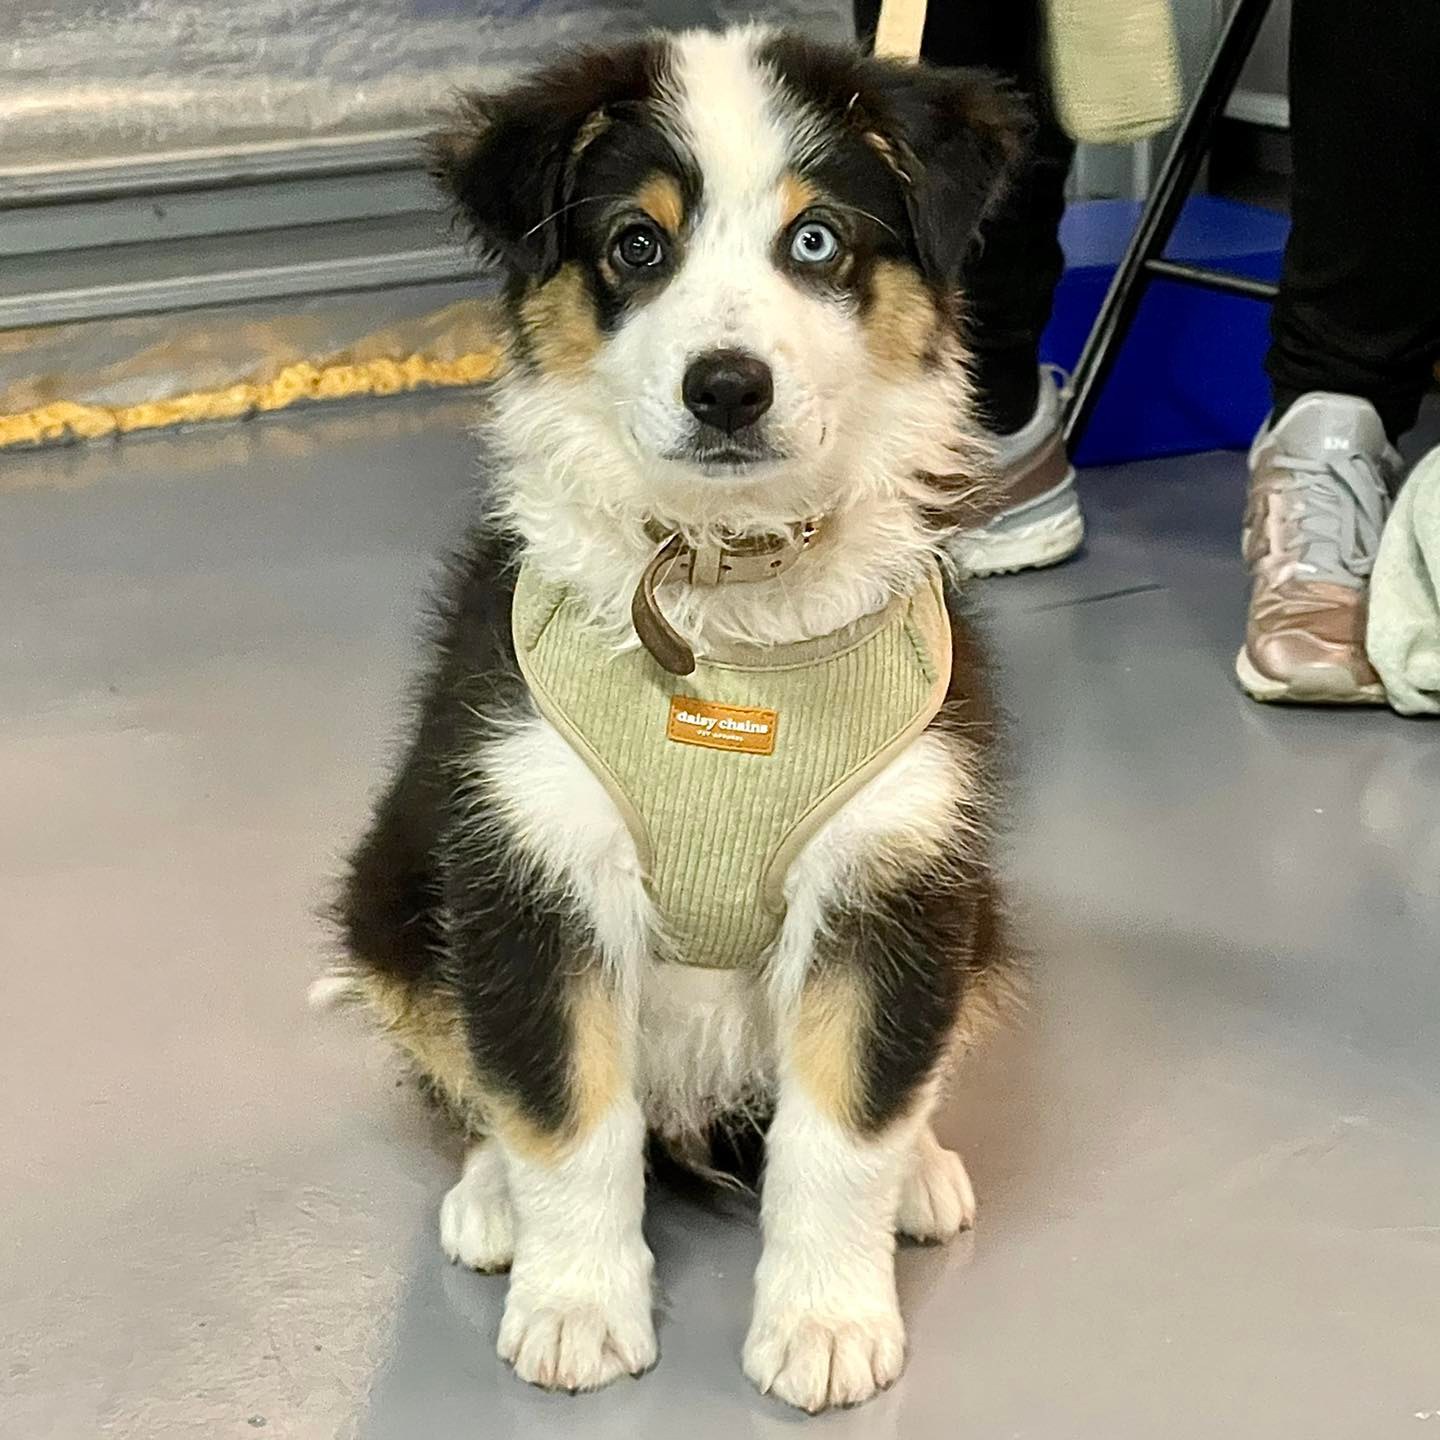 A puppy named Bentley with heterochromia sitting down inside